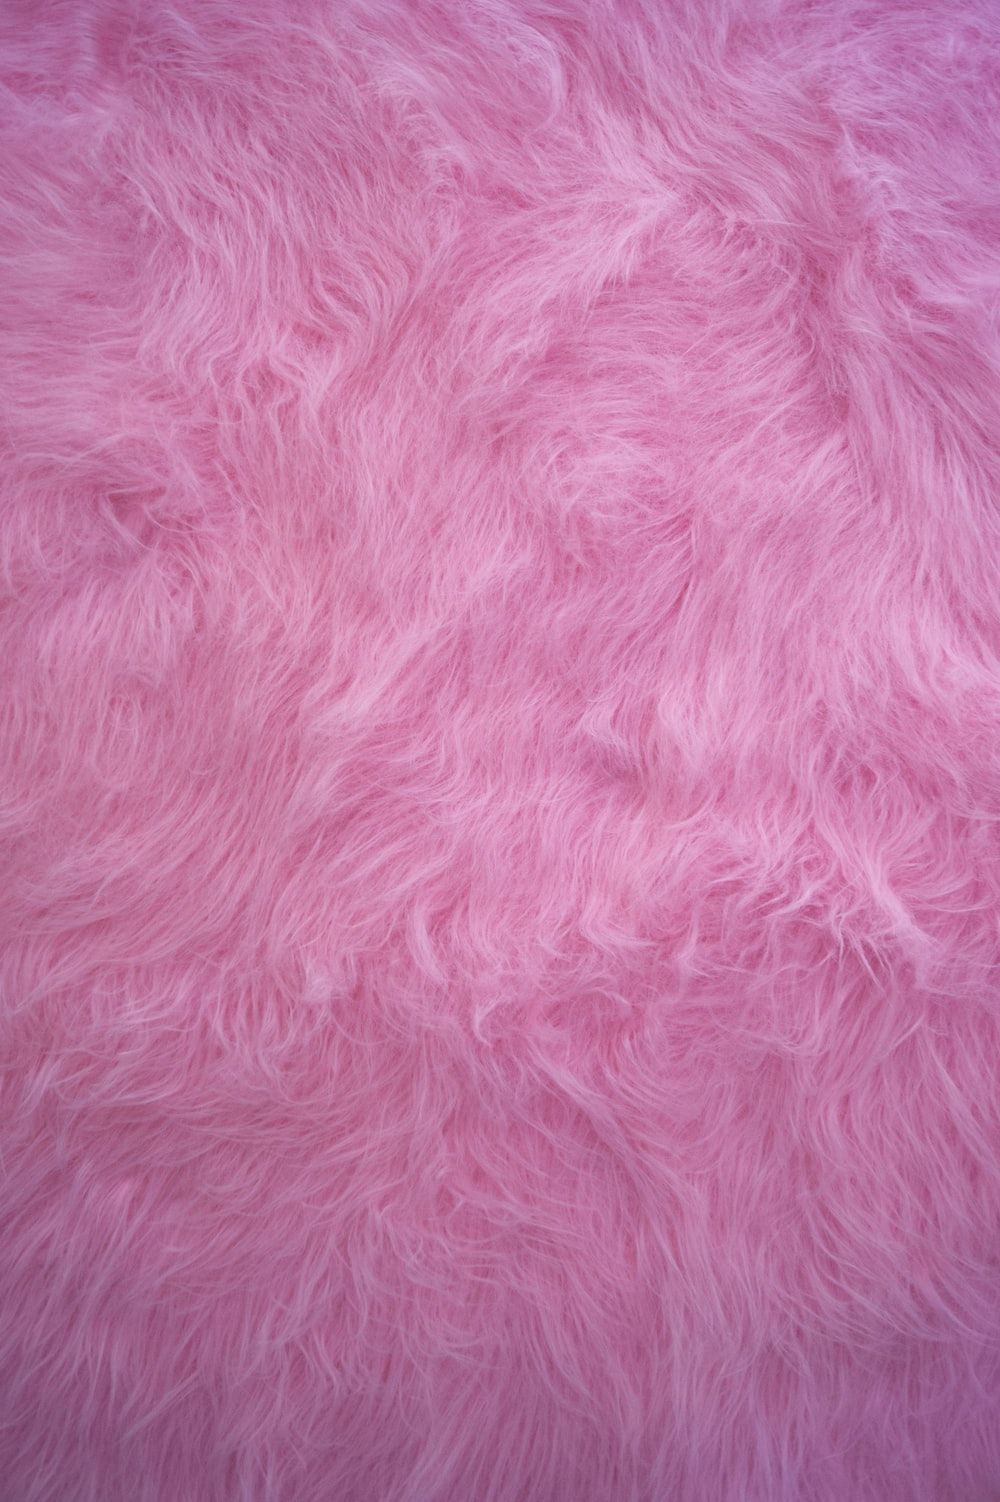 Pink fuzzy background iPhone Wallpapers Free Download